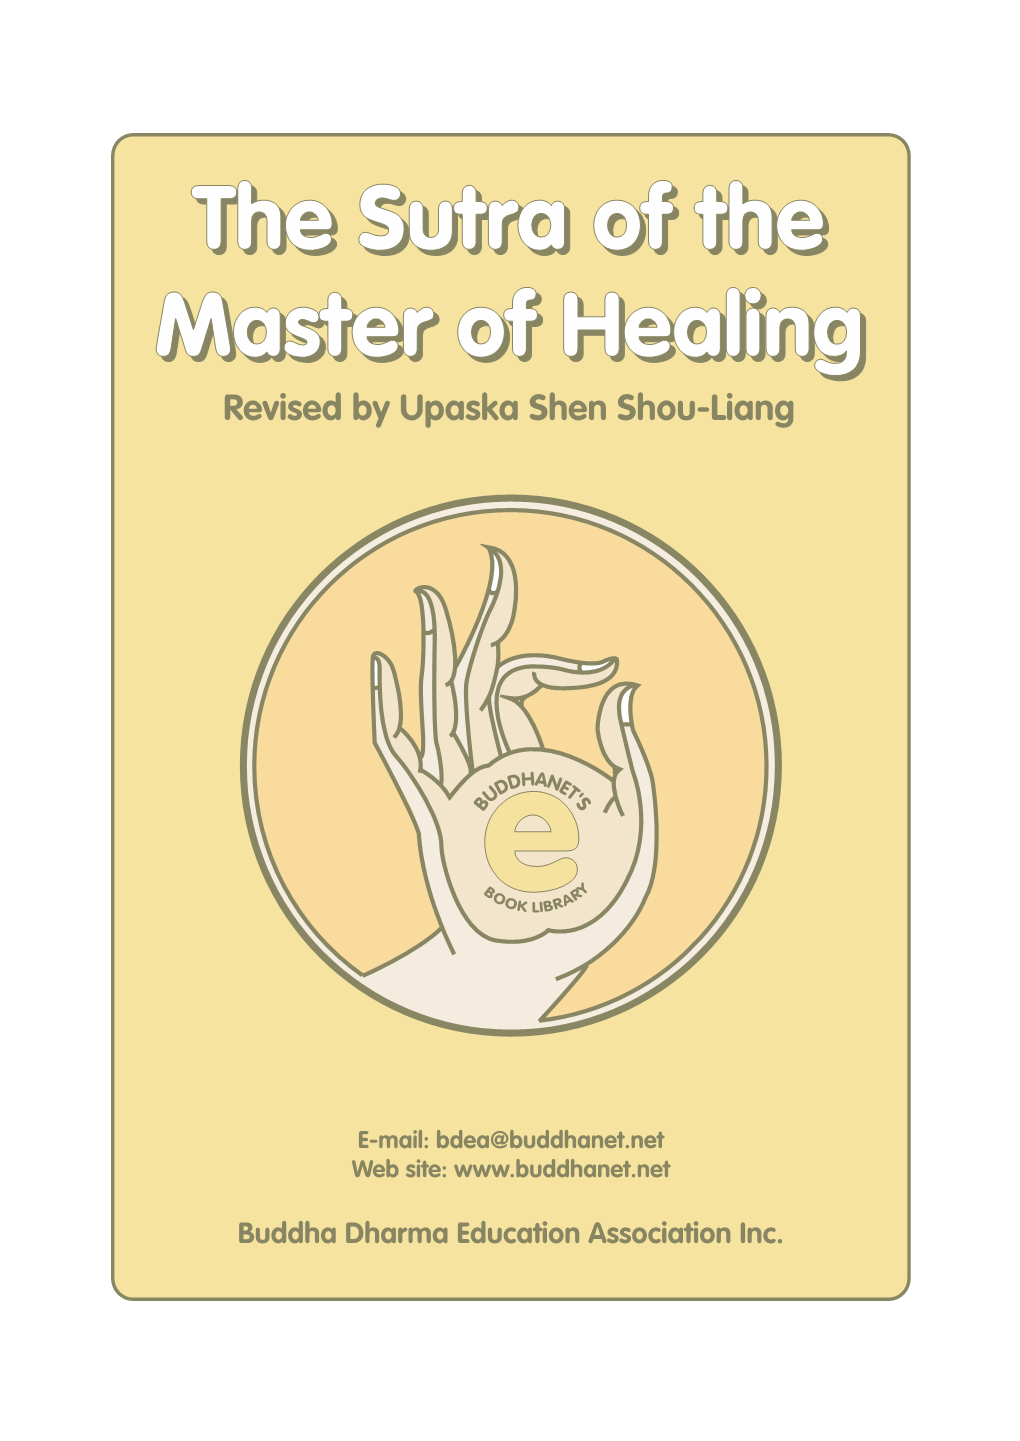 Sutra on the Merits of the Master of Healing